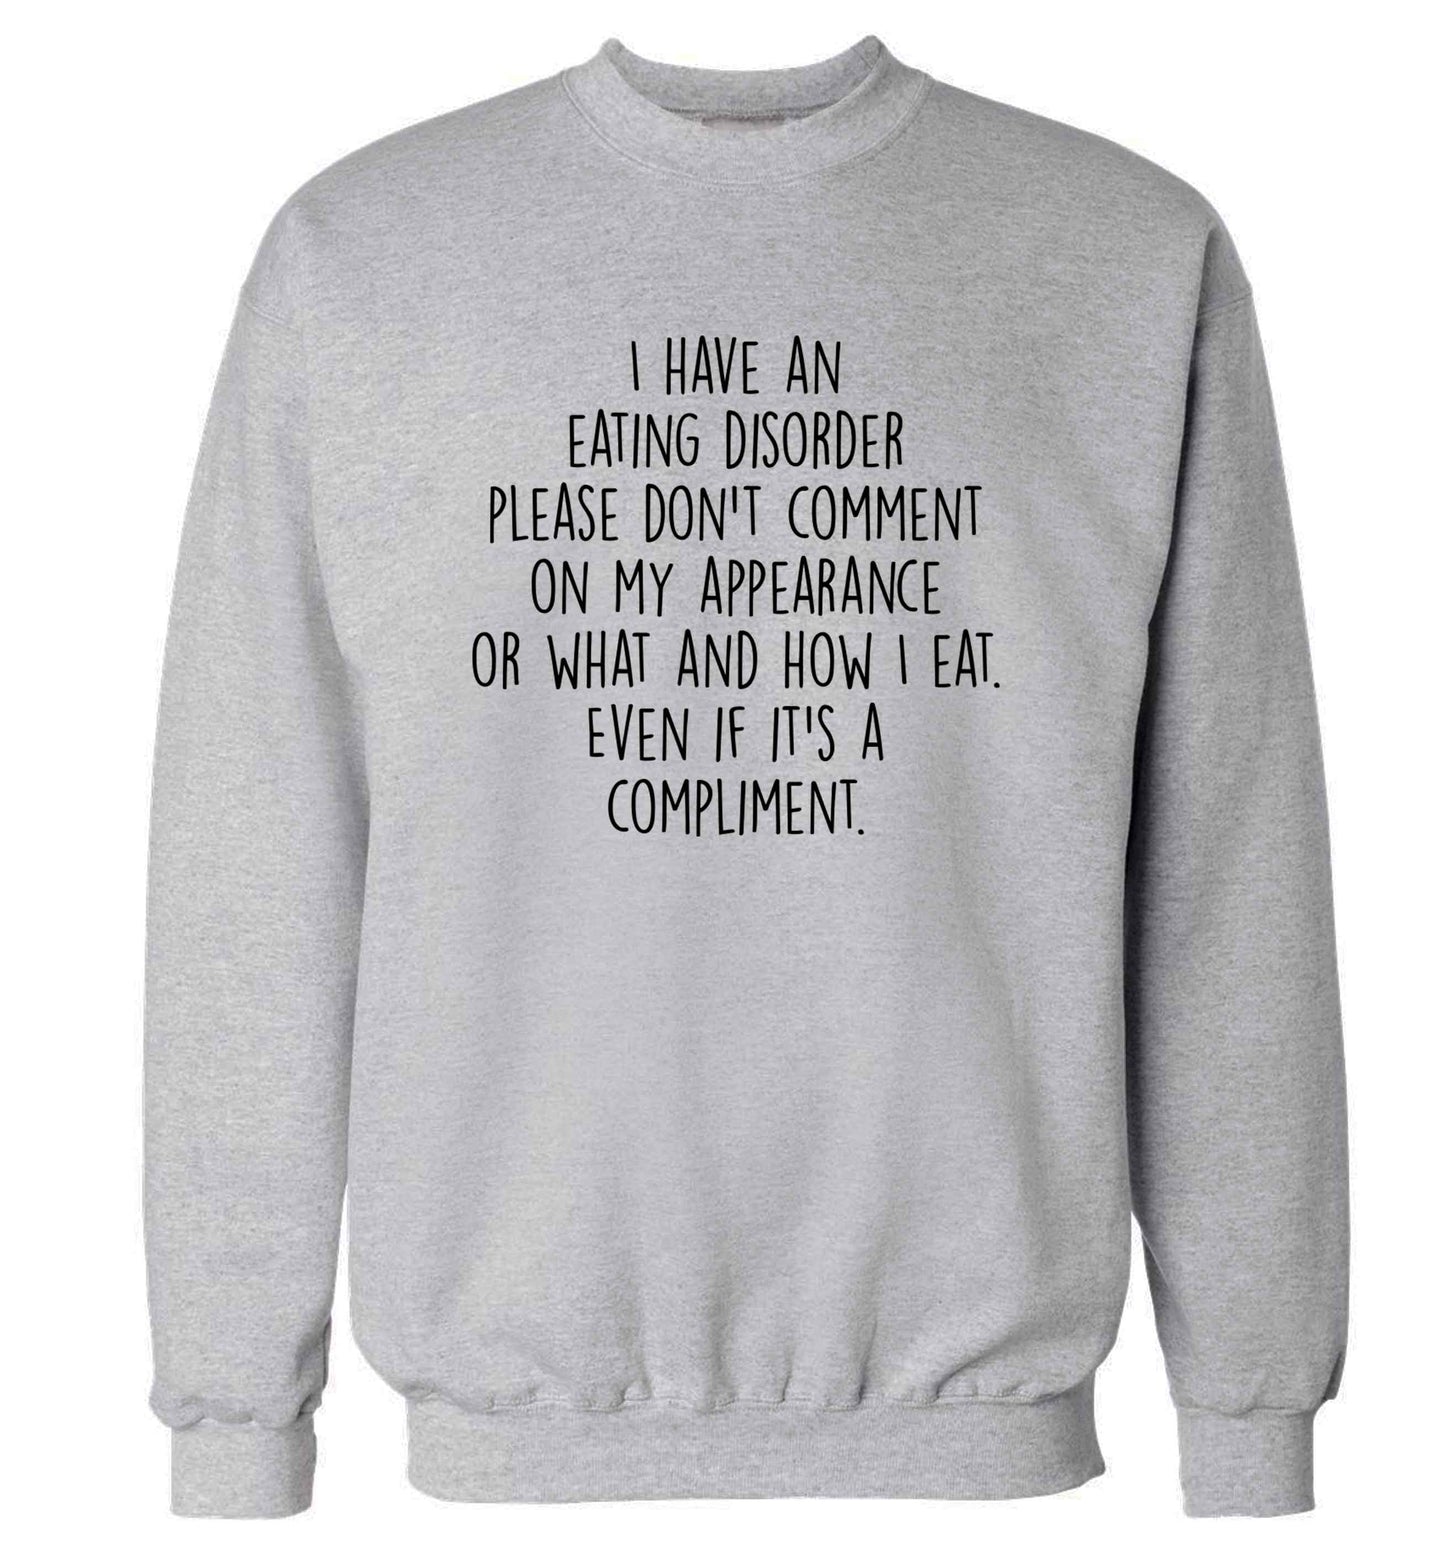 I have an eating disorder please don't comment on my appearance or what and how I eat. Even if it's a compliment adult's unisex grey sweater 2XL